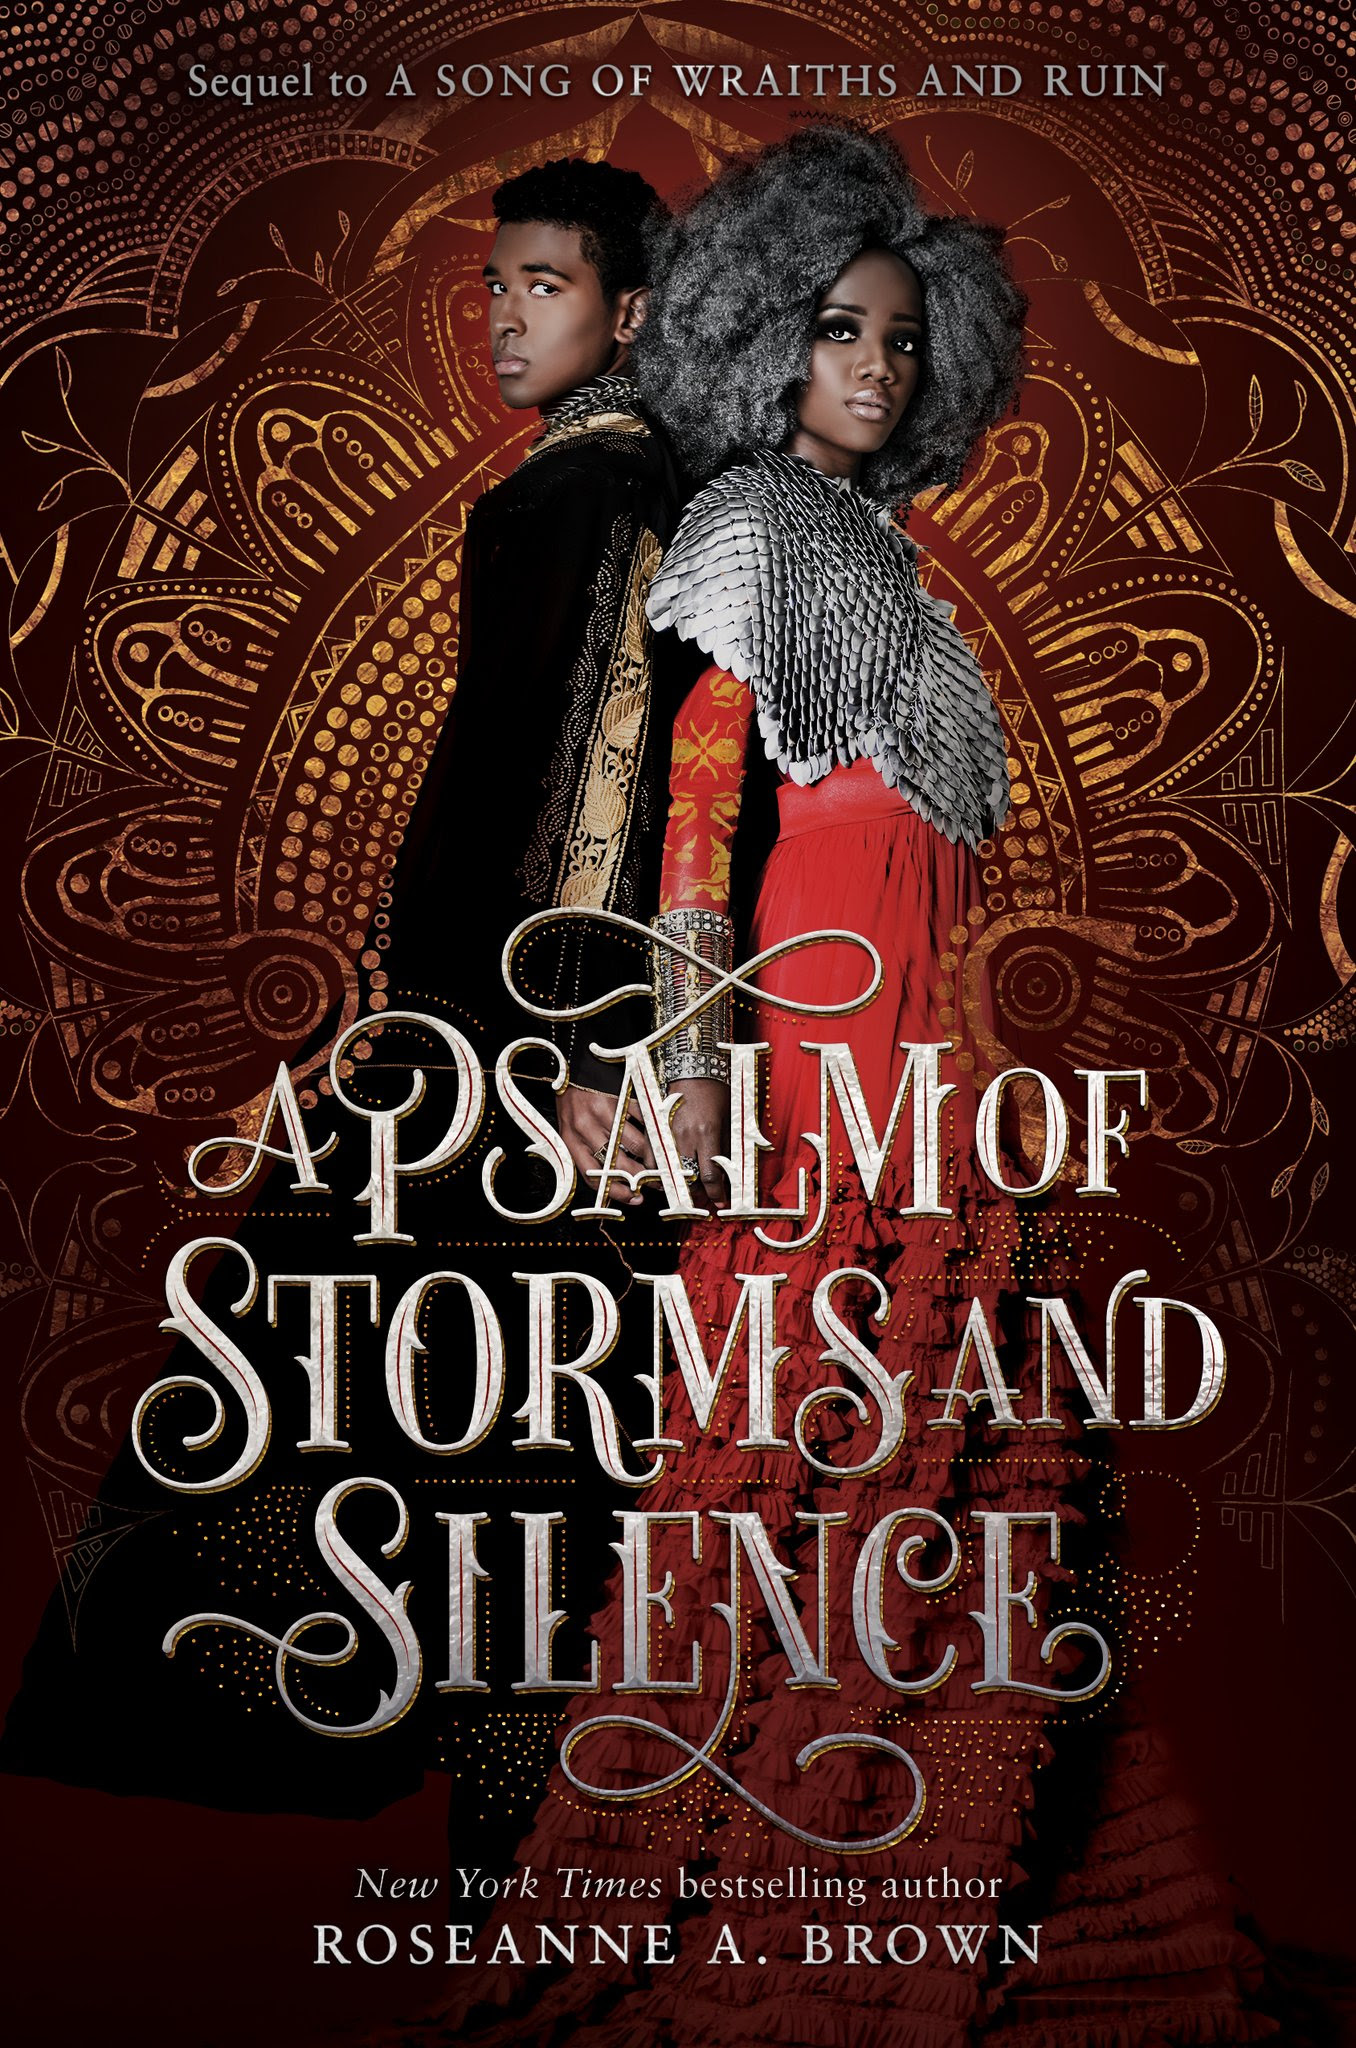 pdf download A Psalm of Storms and Silence (A Song of Wraiths and Ruin, #2)